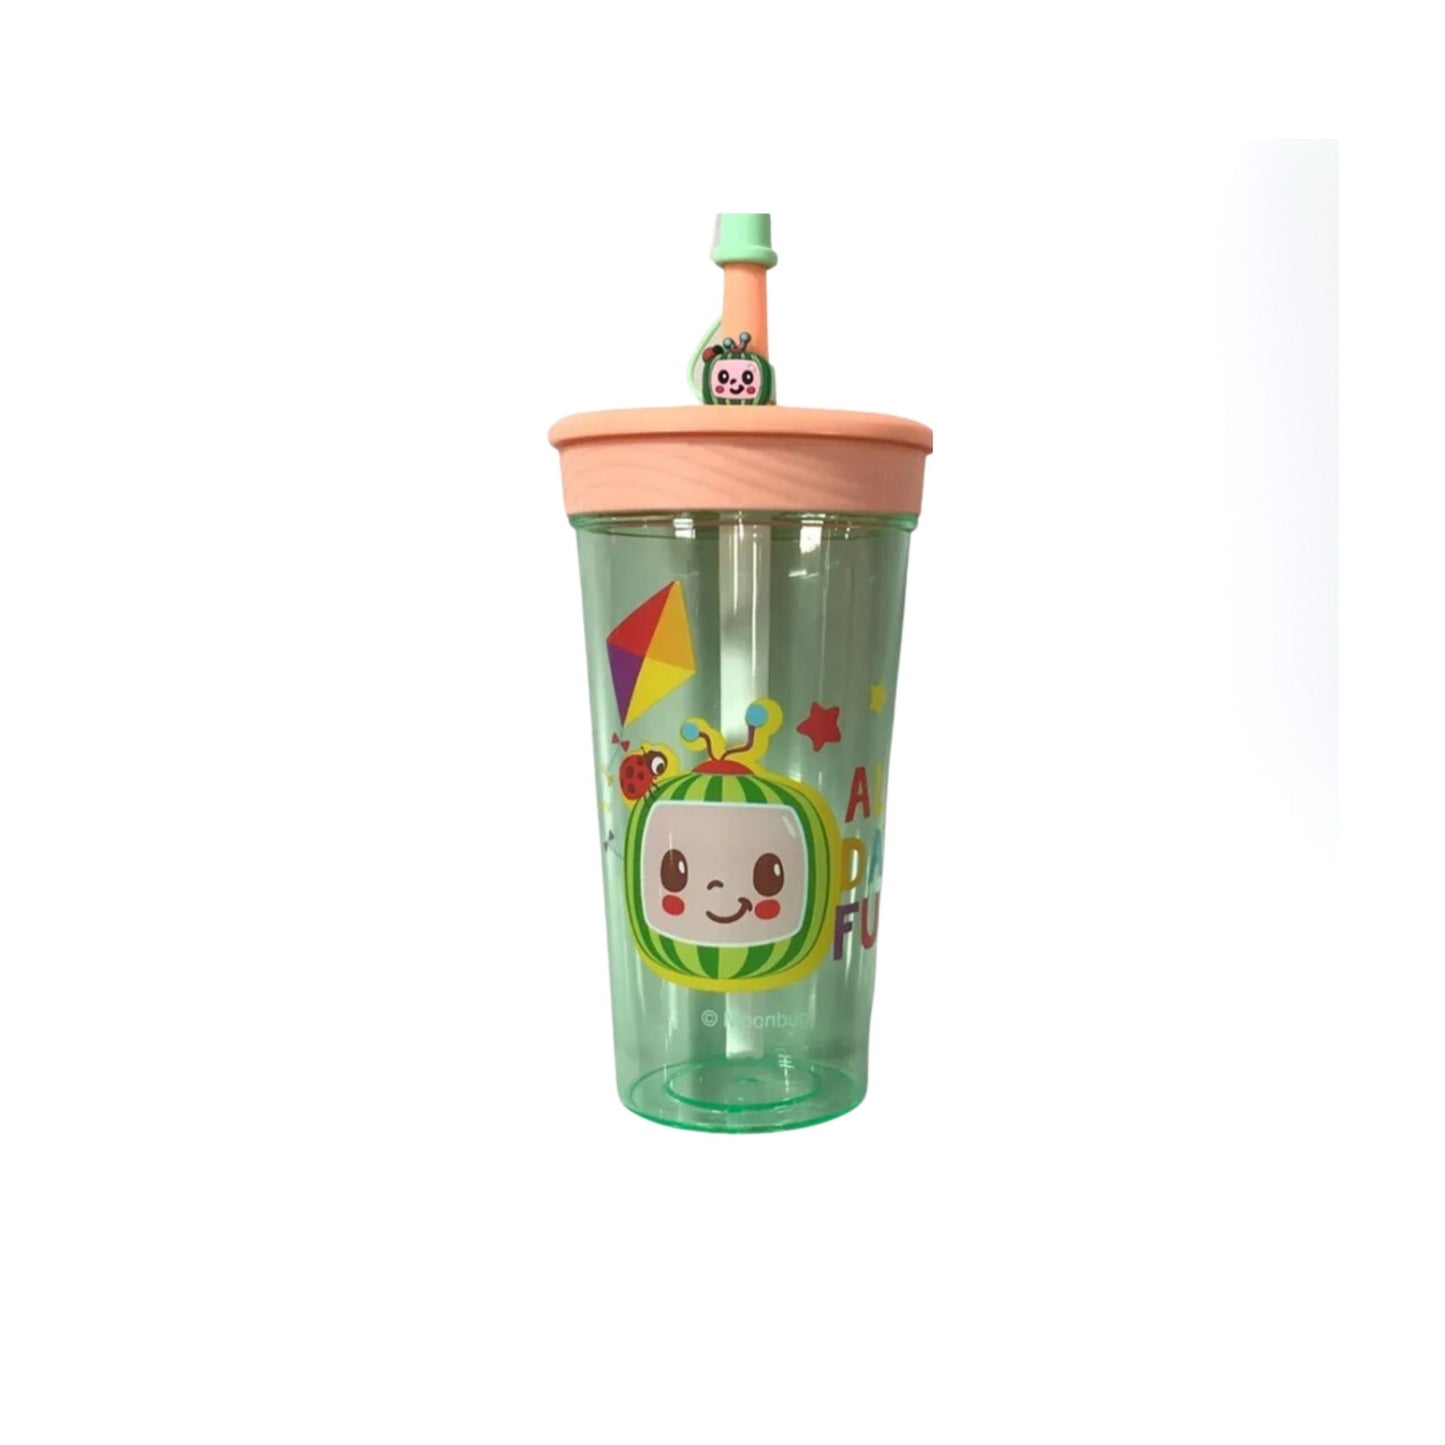 Cocomelon Tumbler I Encourages child to hydrate more, Promotes independence, Child-friendly, and Easy to Use